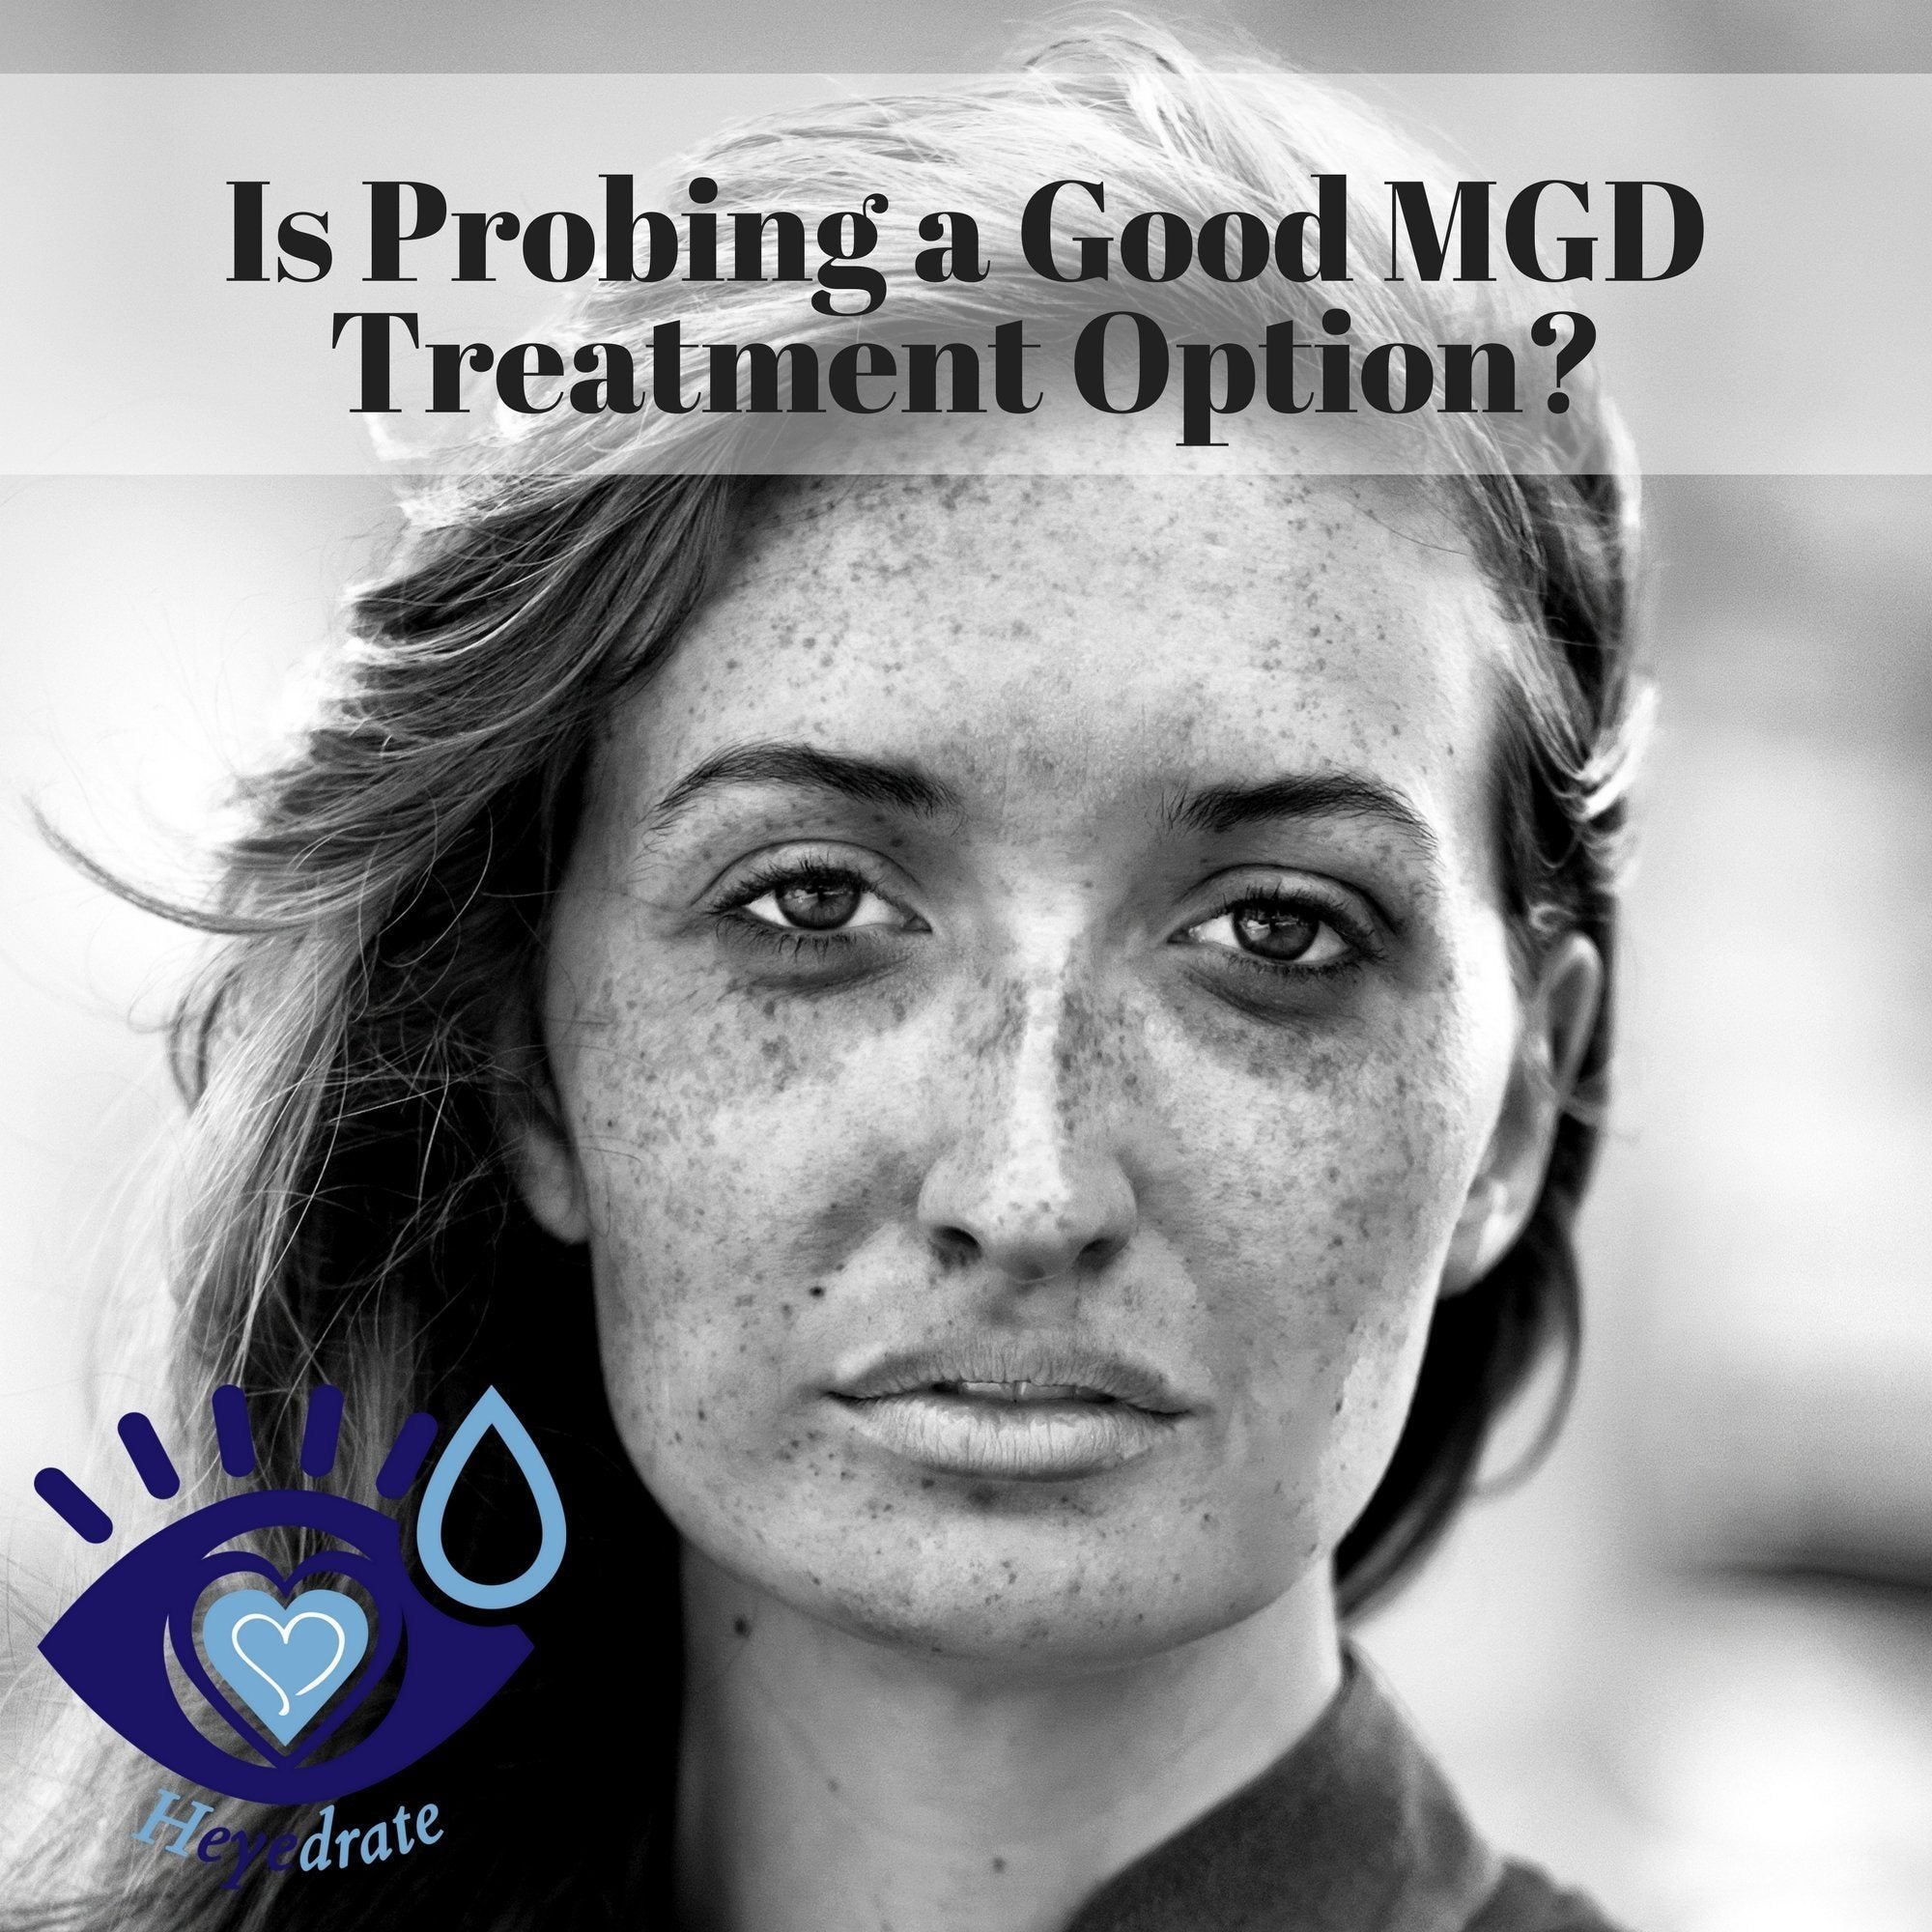 Is Probing a Good MGD Treatment Option?